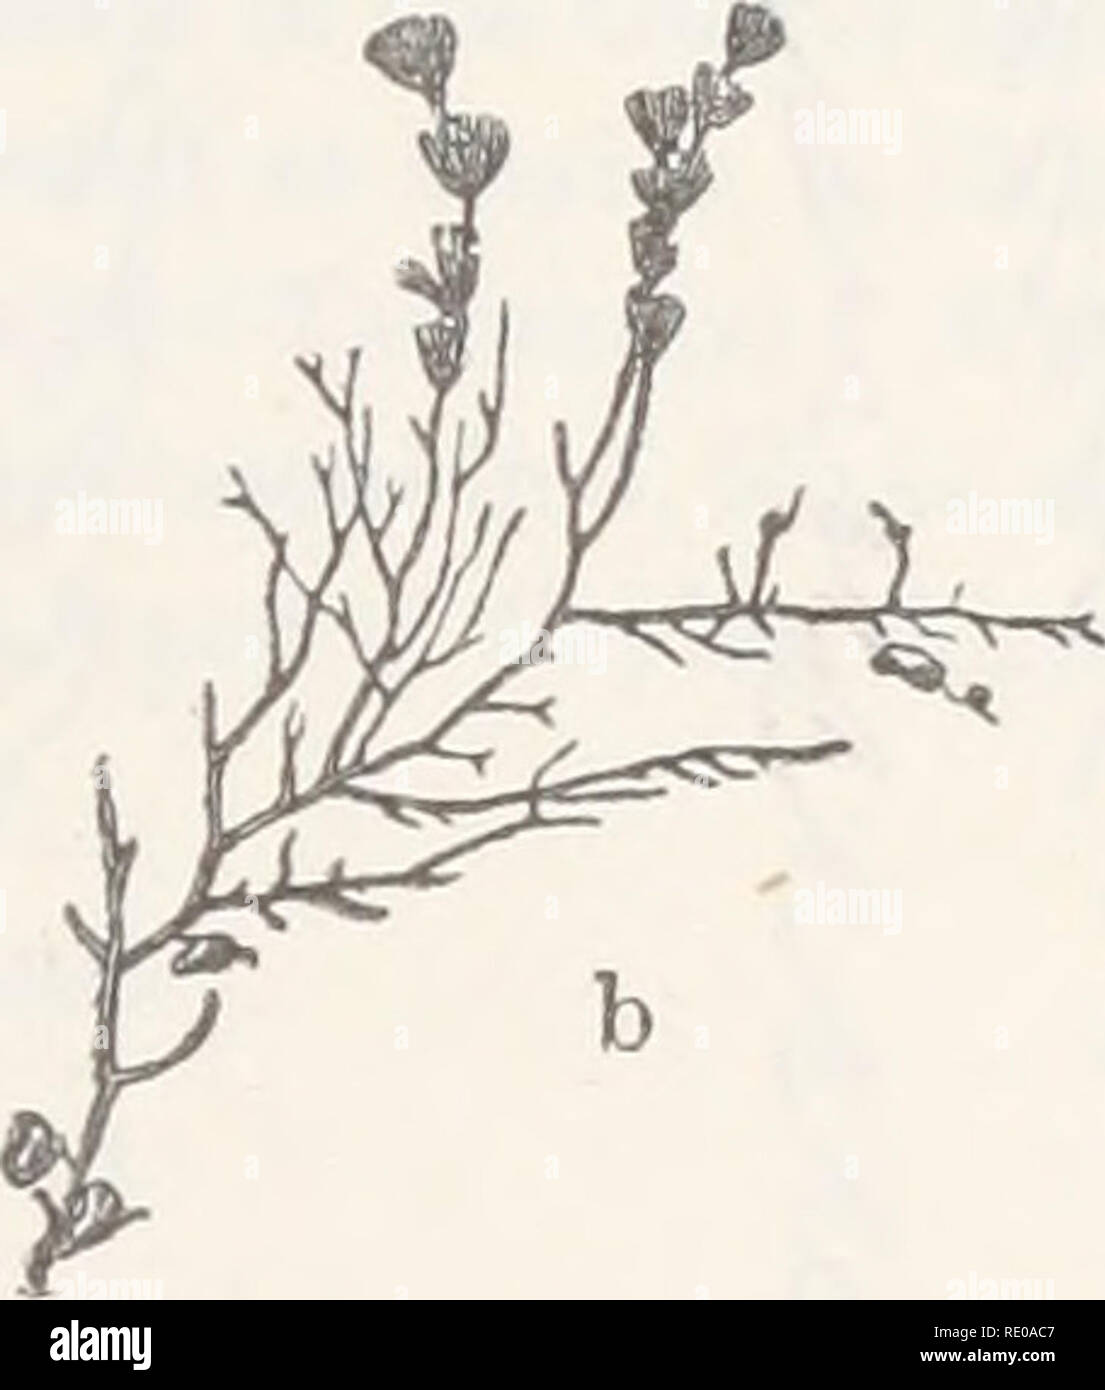 . Ecological and systematic studies of the Ceylon species of Caulerpa. Marine algae. Fig. 1.—C. verticillata, j. g. ag. (1 x 1). Periodicity.—^From notes taken by me it seems that C. verticillata at Galle reaches its highest development during the months from November to March, when it occurs in masses at the mouth of the river. On visiting the identical spot in August of the same year (1903) it was scantier, but Ceramia and other Florideae were more abundant. The specimens of this plant collected by Prof. Kjellman (WiTTROCK &amp; NoRDSTBDT, AlgsB exsicc. No. 347) at Galle during the expeditio Stock Photo